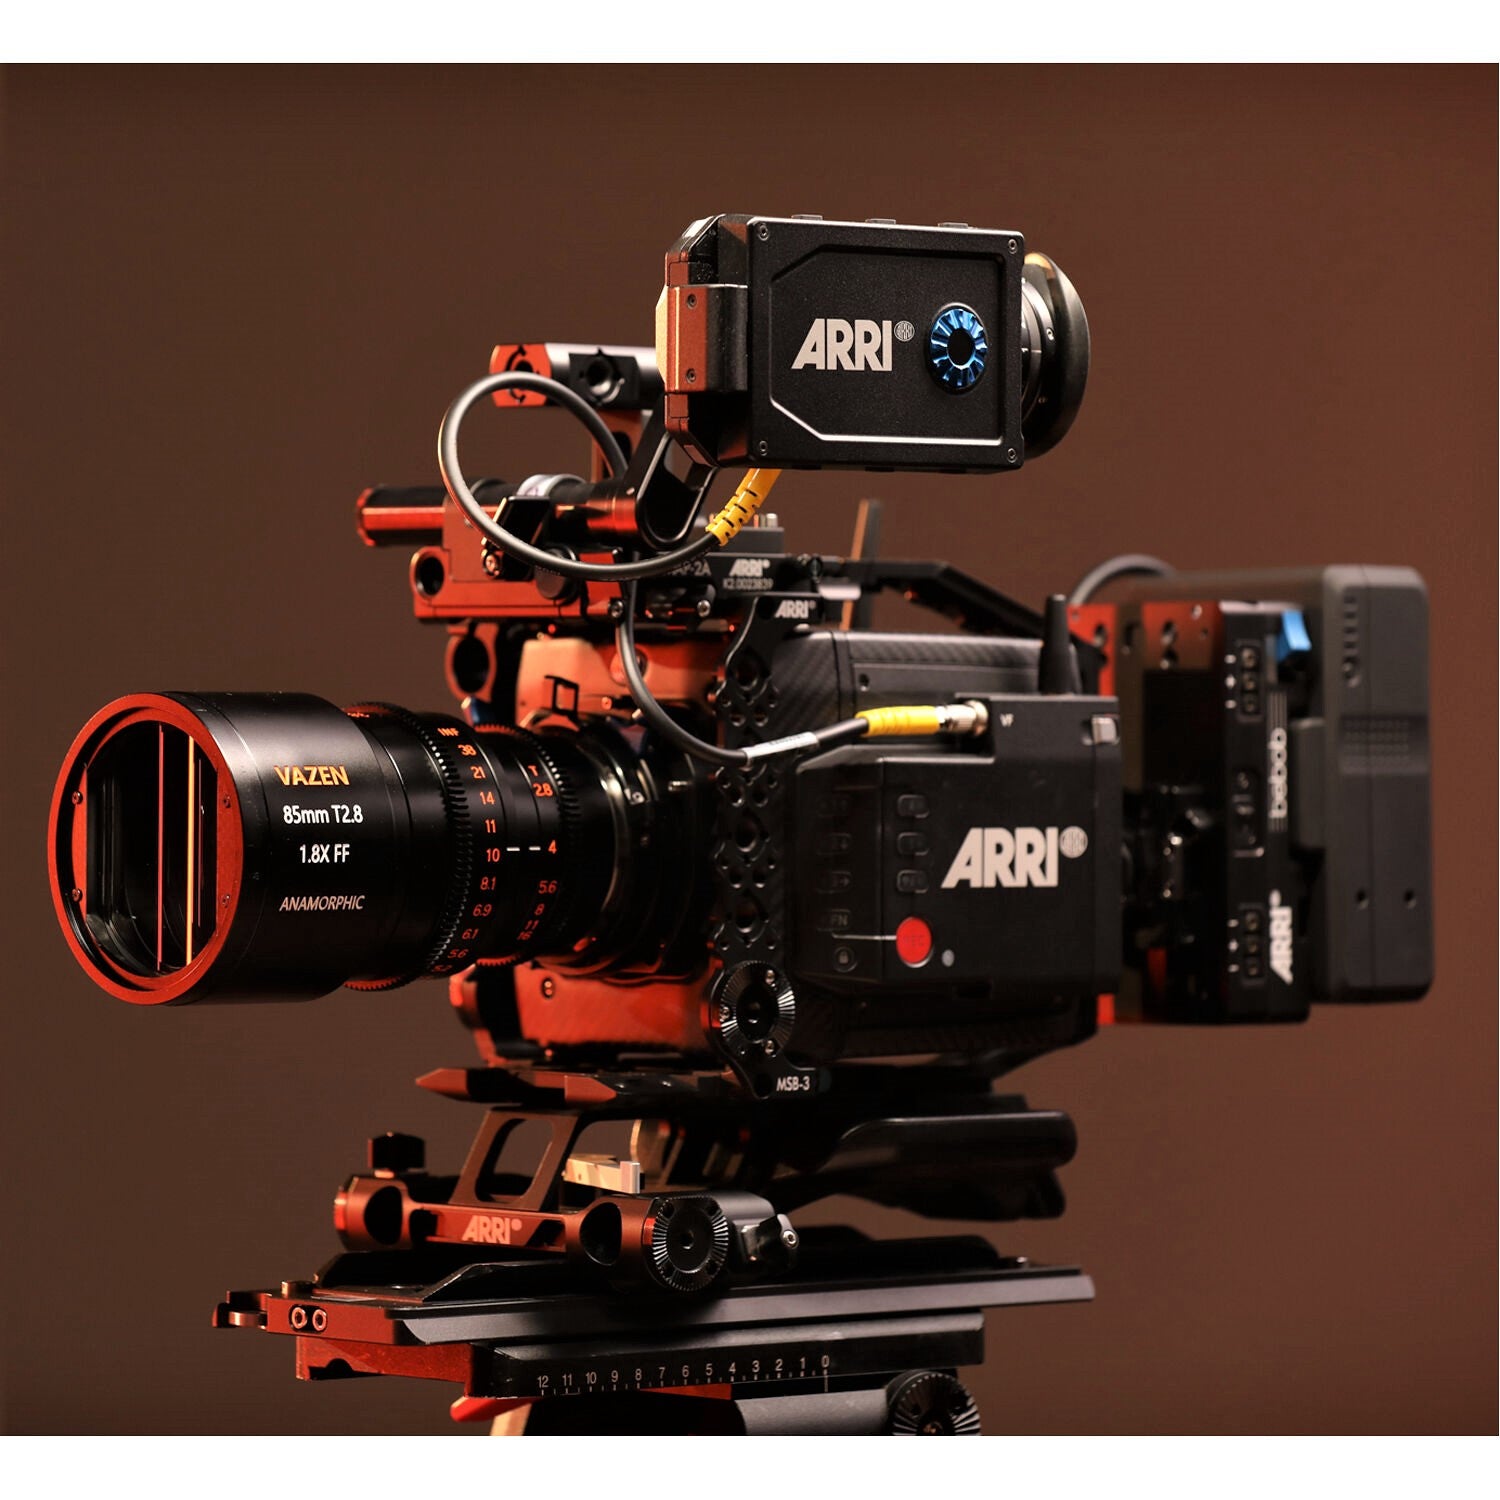 Vazen 85mm T2.8 1.8X Anamorphic Lens for PL/EF Full Frame Camera Attached to Arri Camera